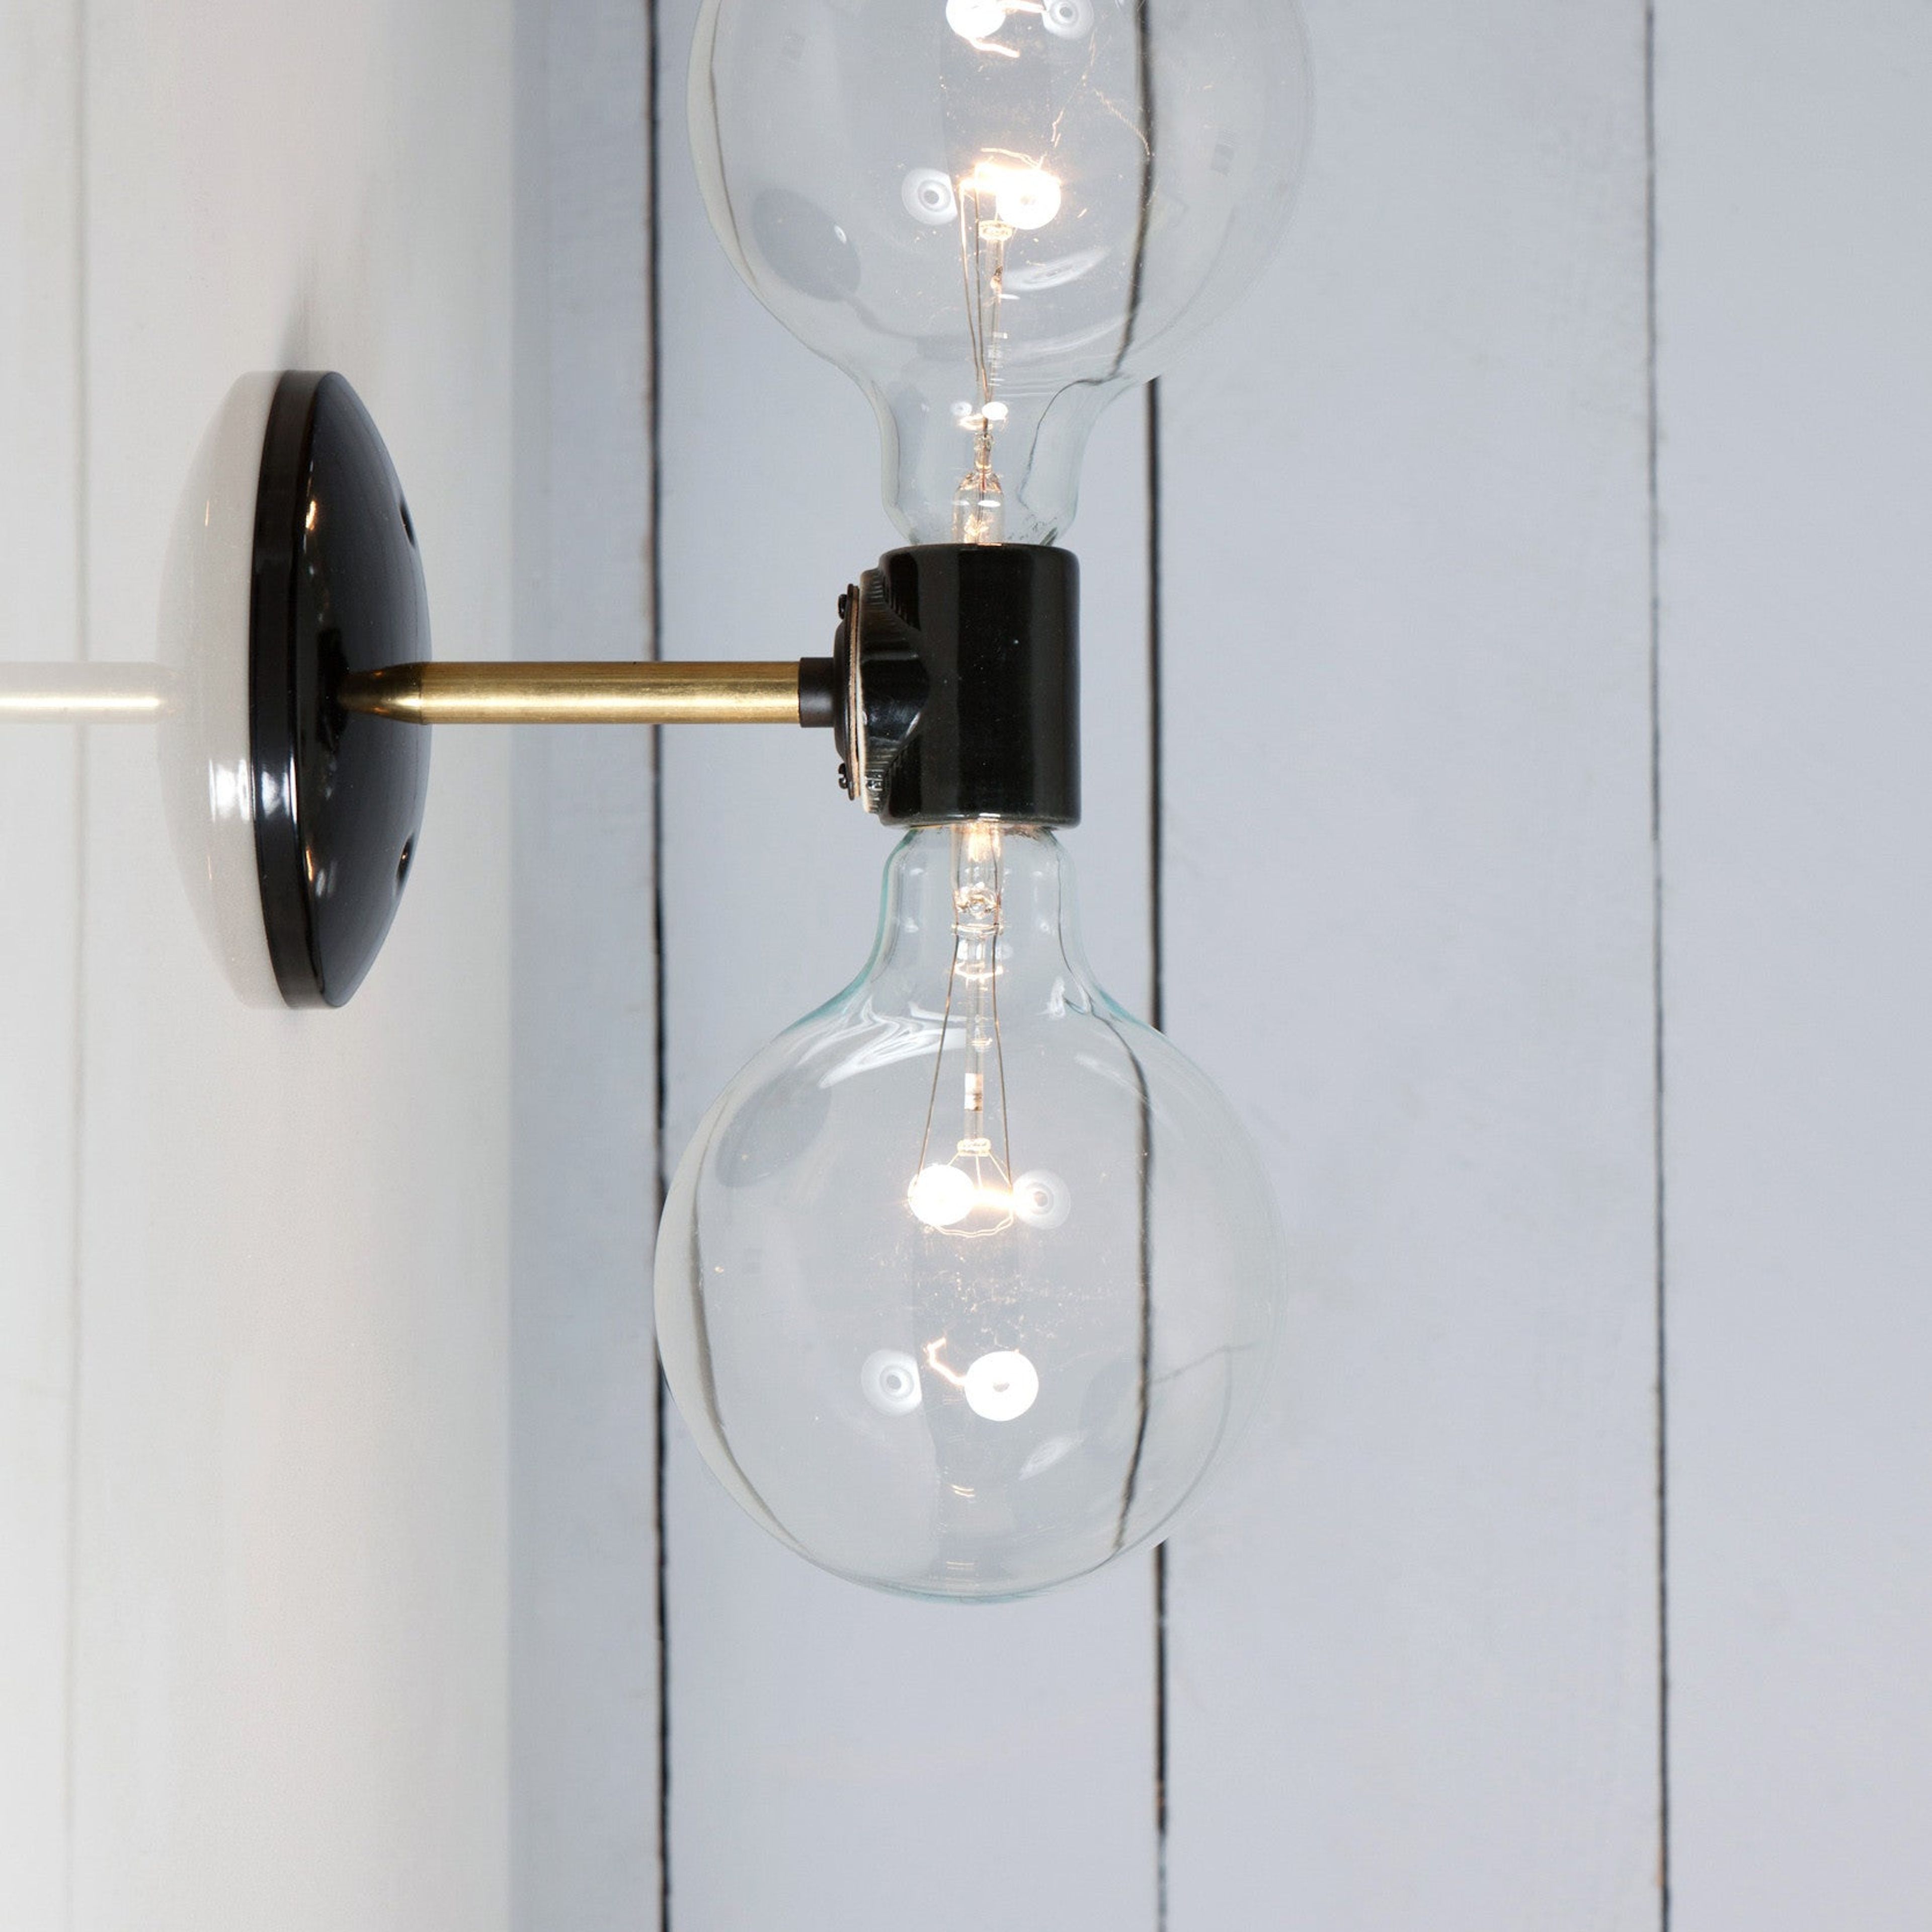 Double Brass Wall Sconce Light - Bare Bulb Lamp